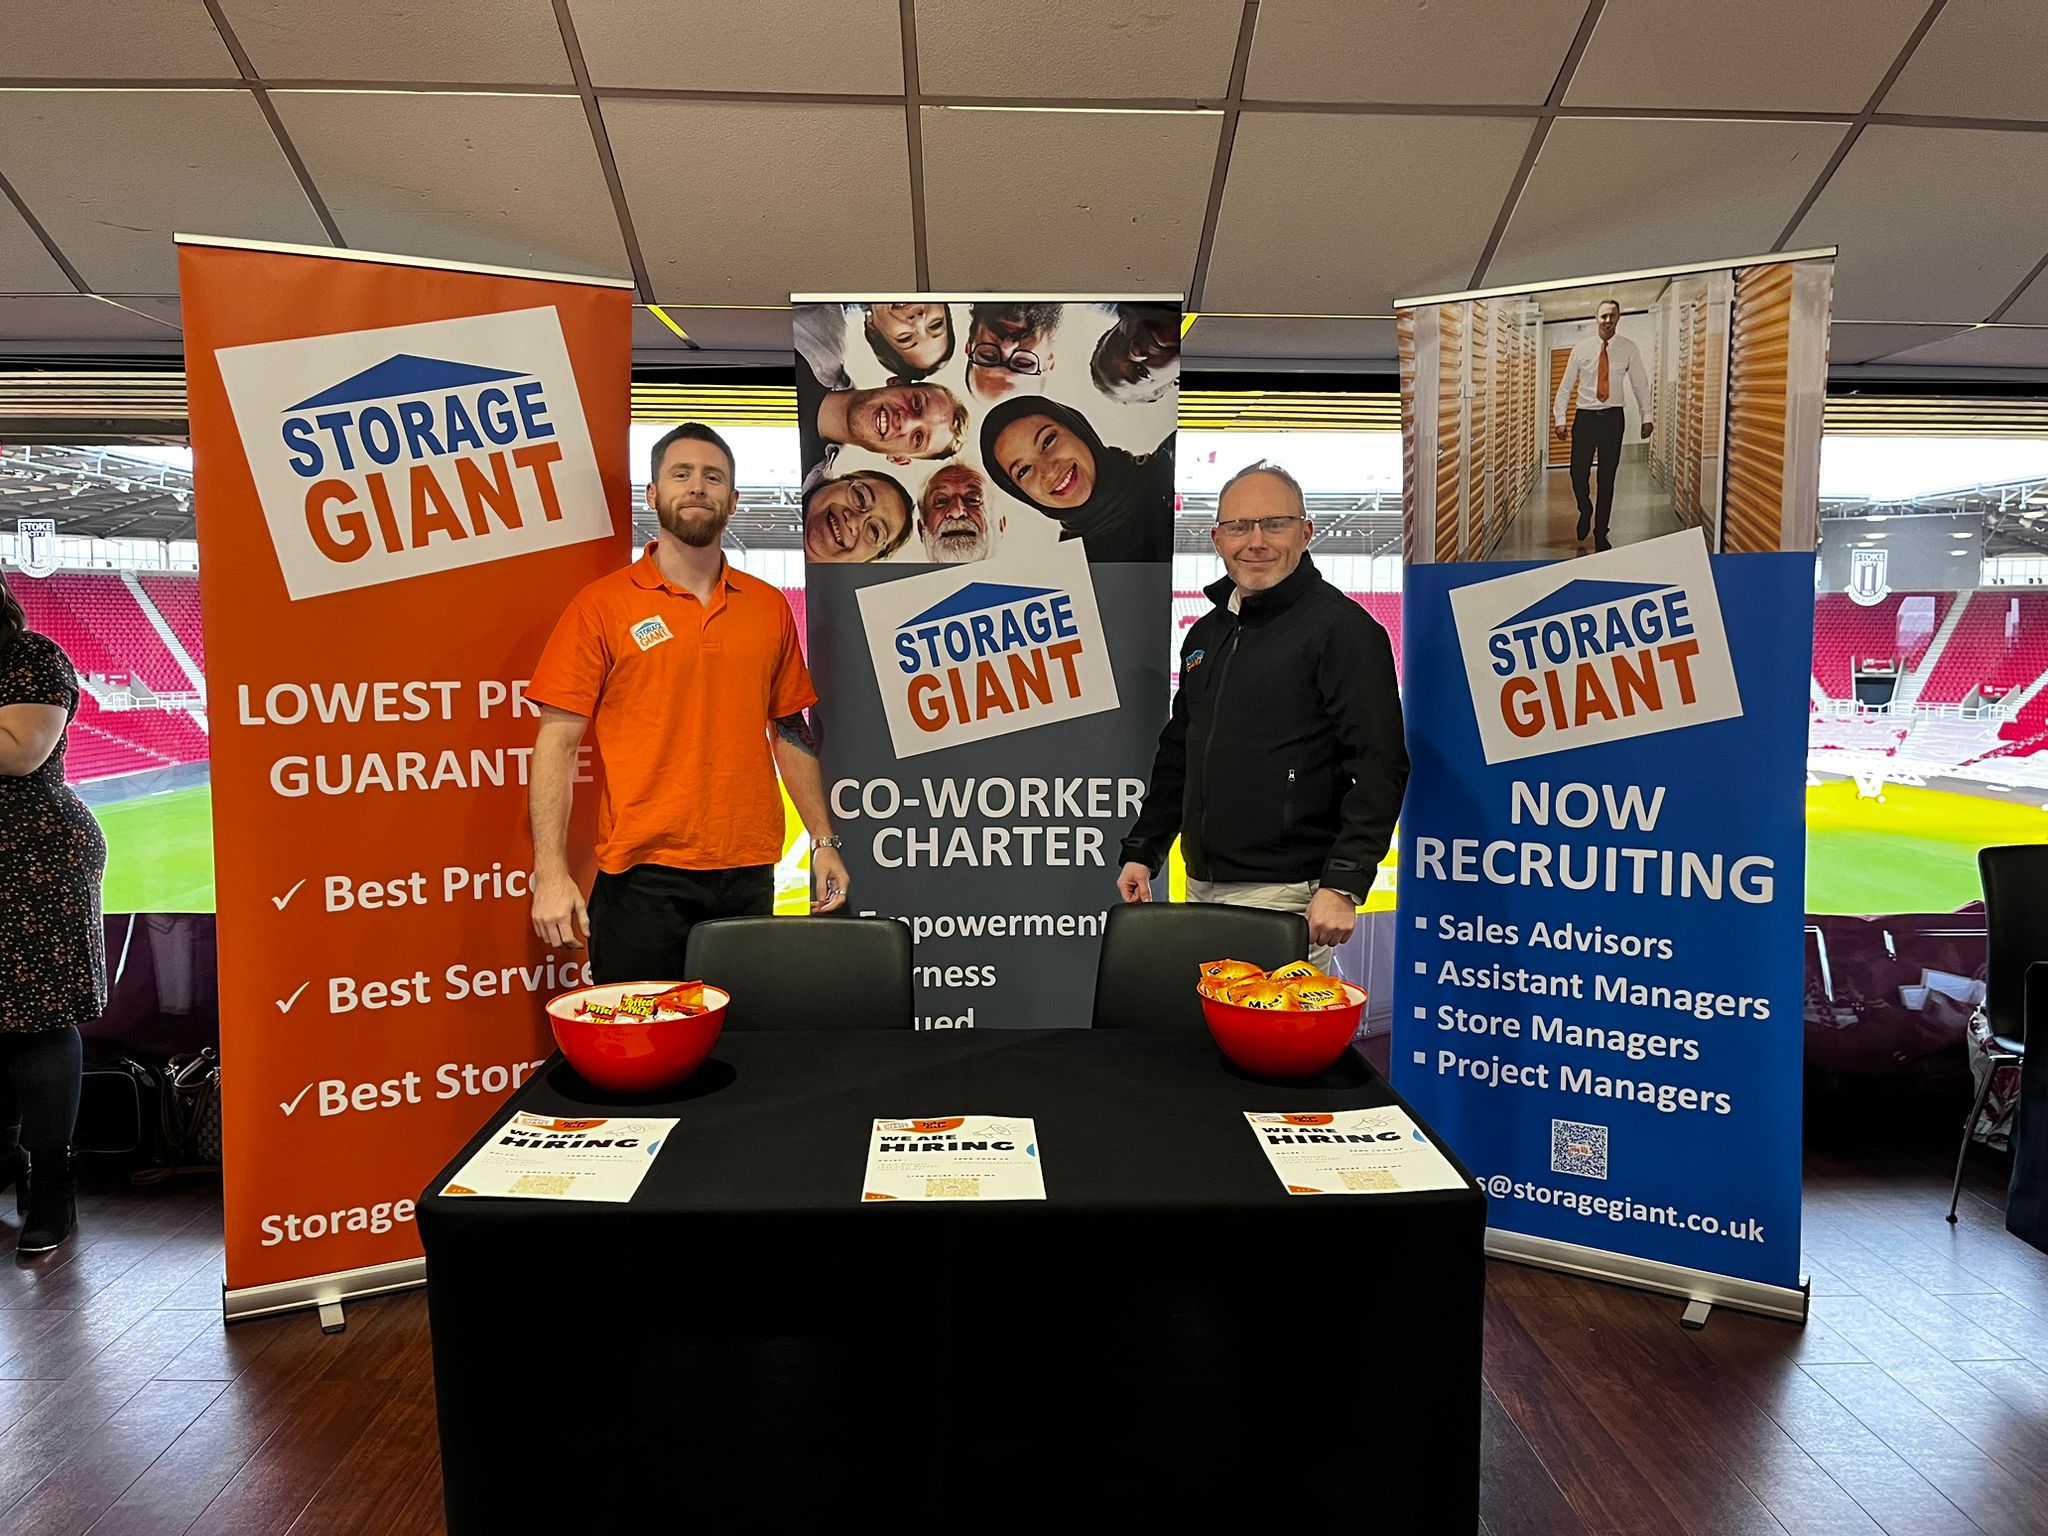 Storage Giant at our event in Stoke-on-Trent